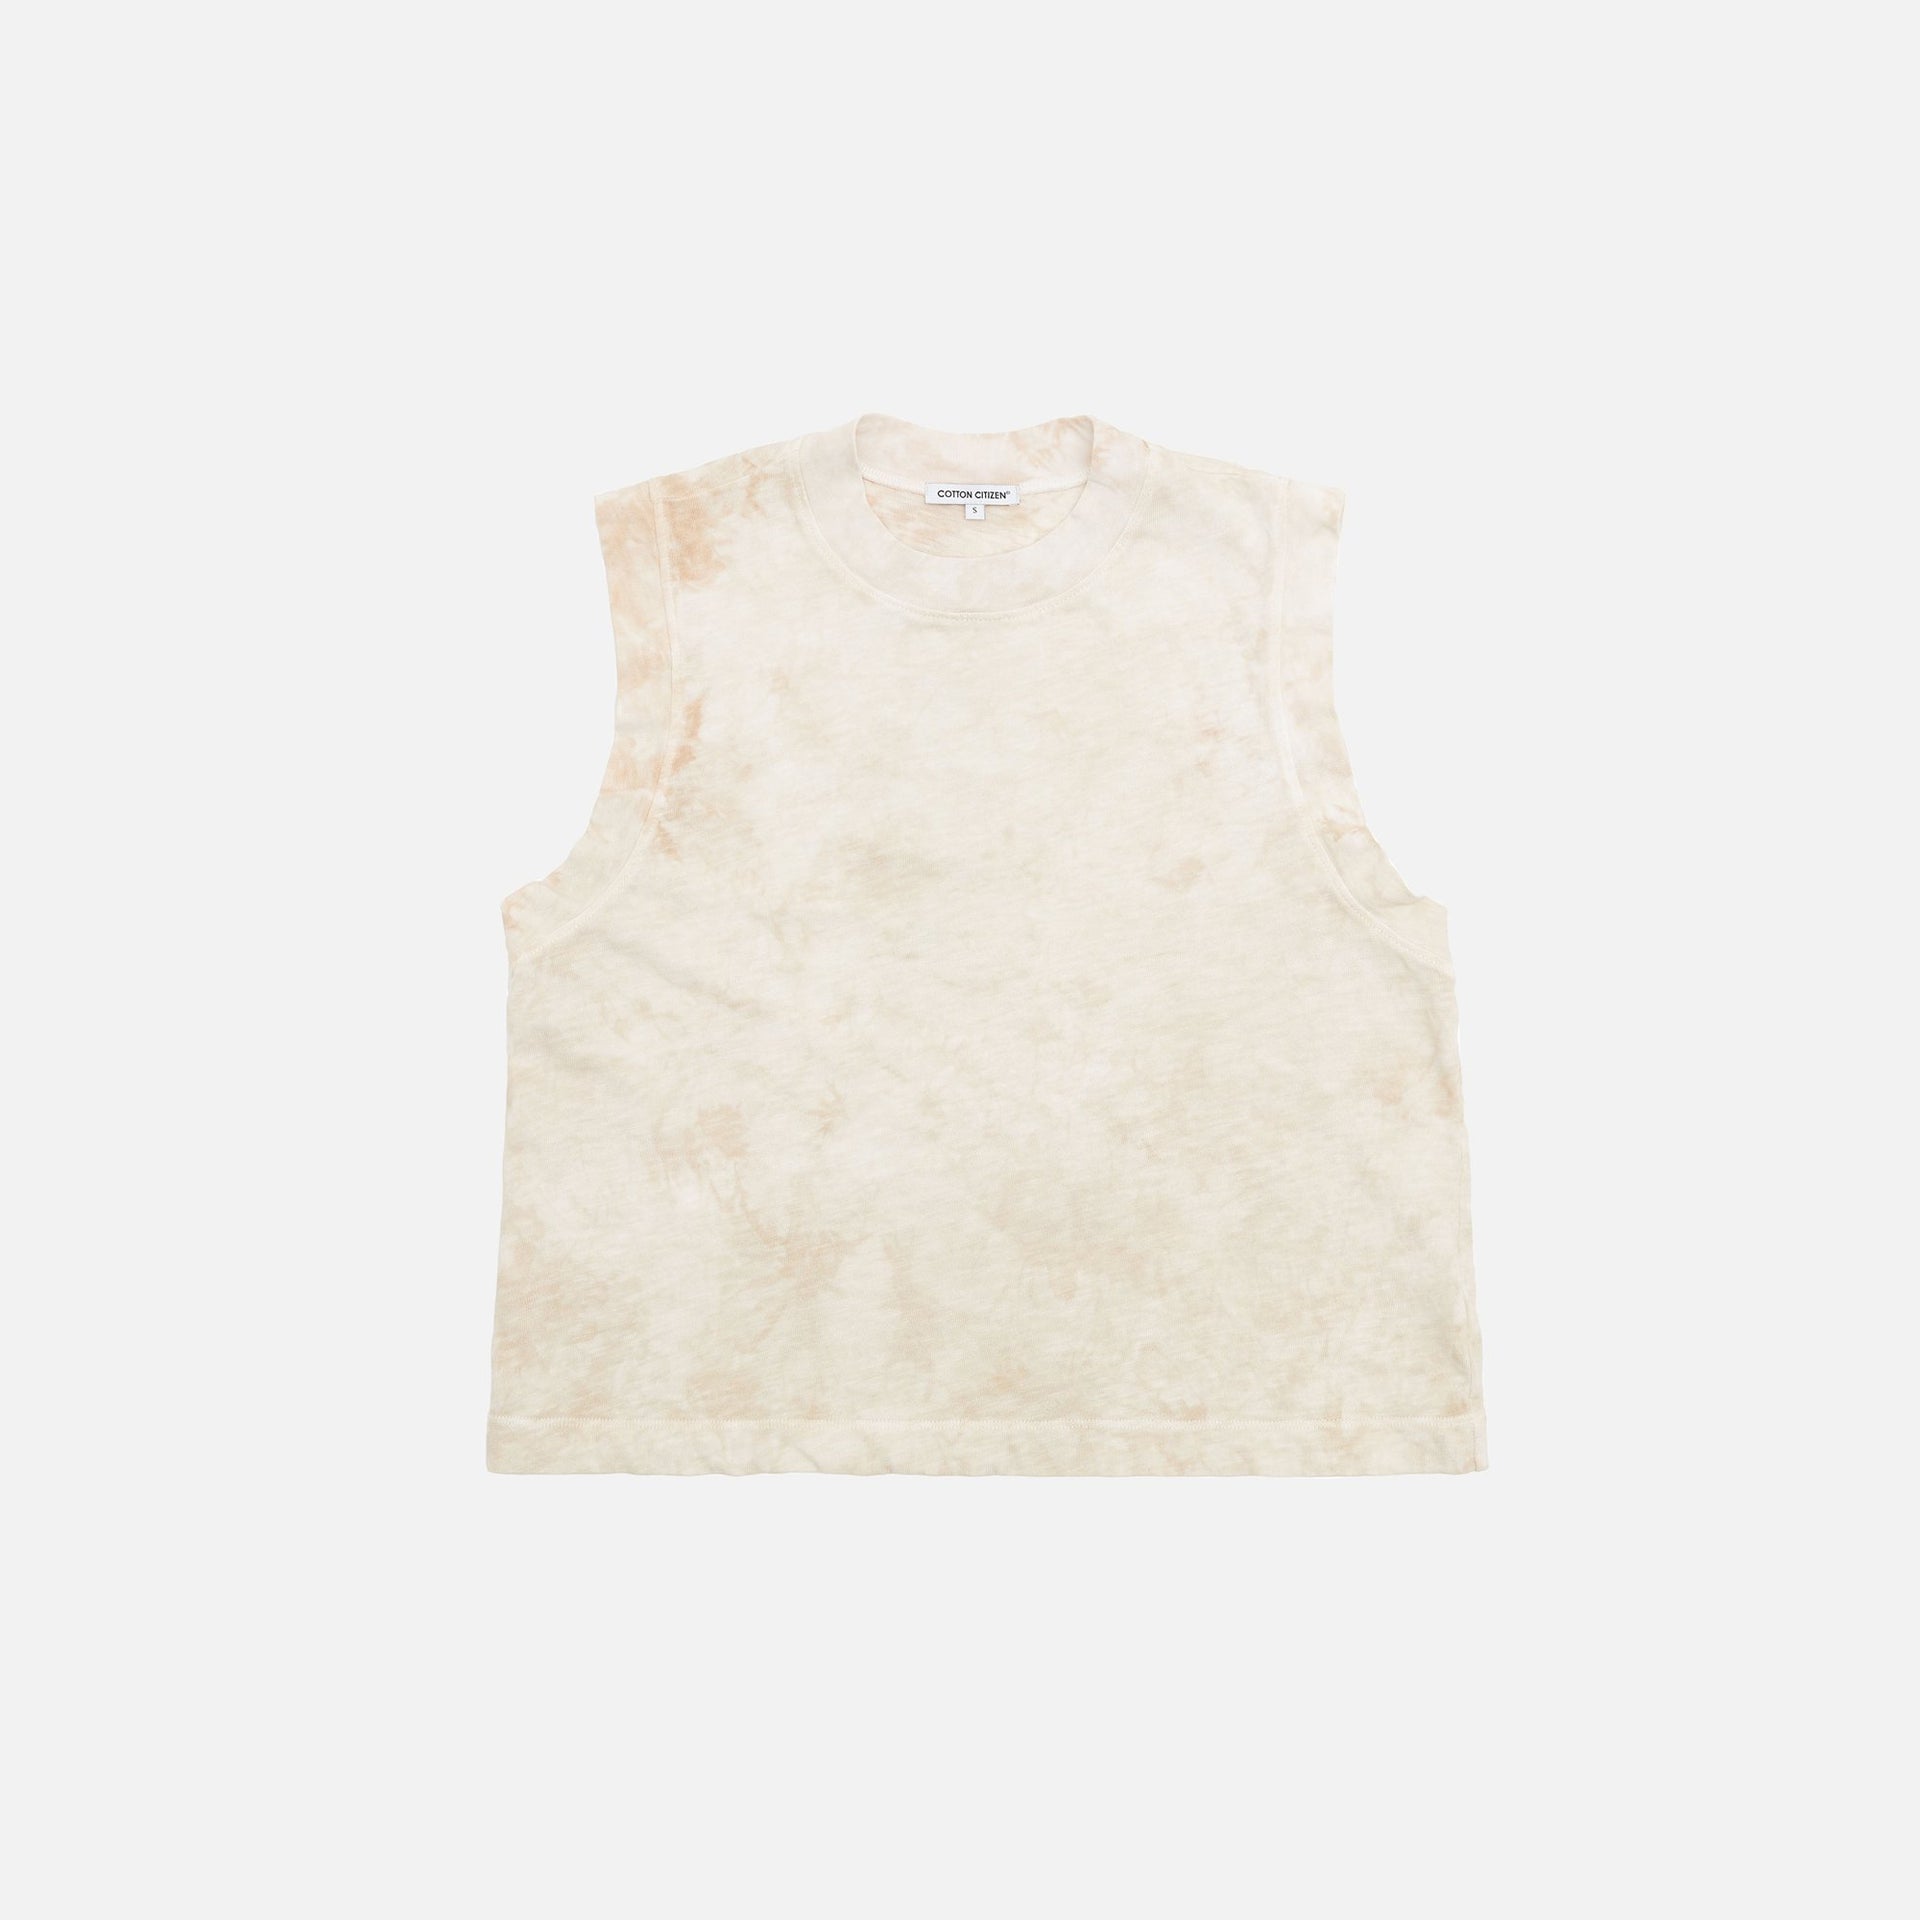 Cotton Citizen Tokyo Muscle Tee - Oatmeal Crystal